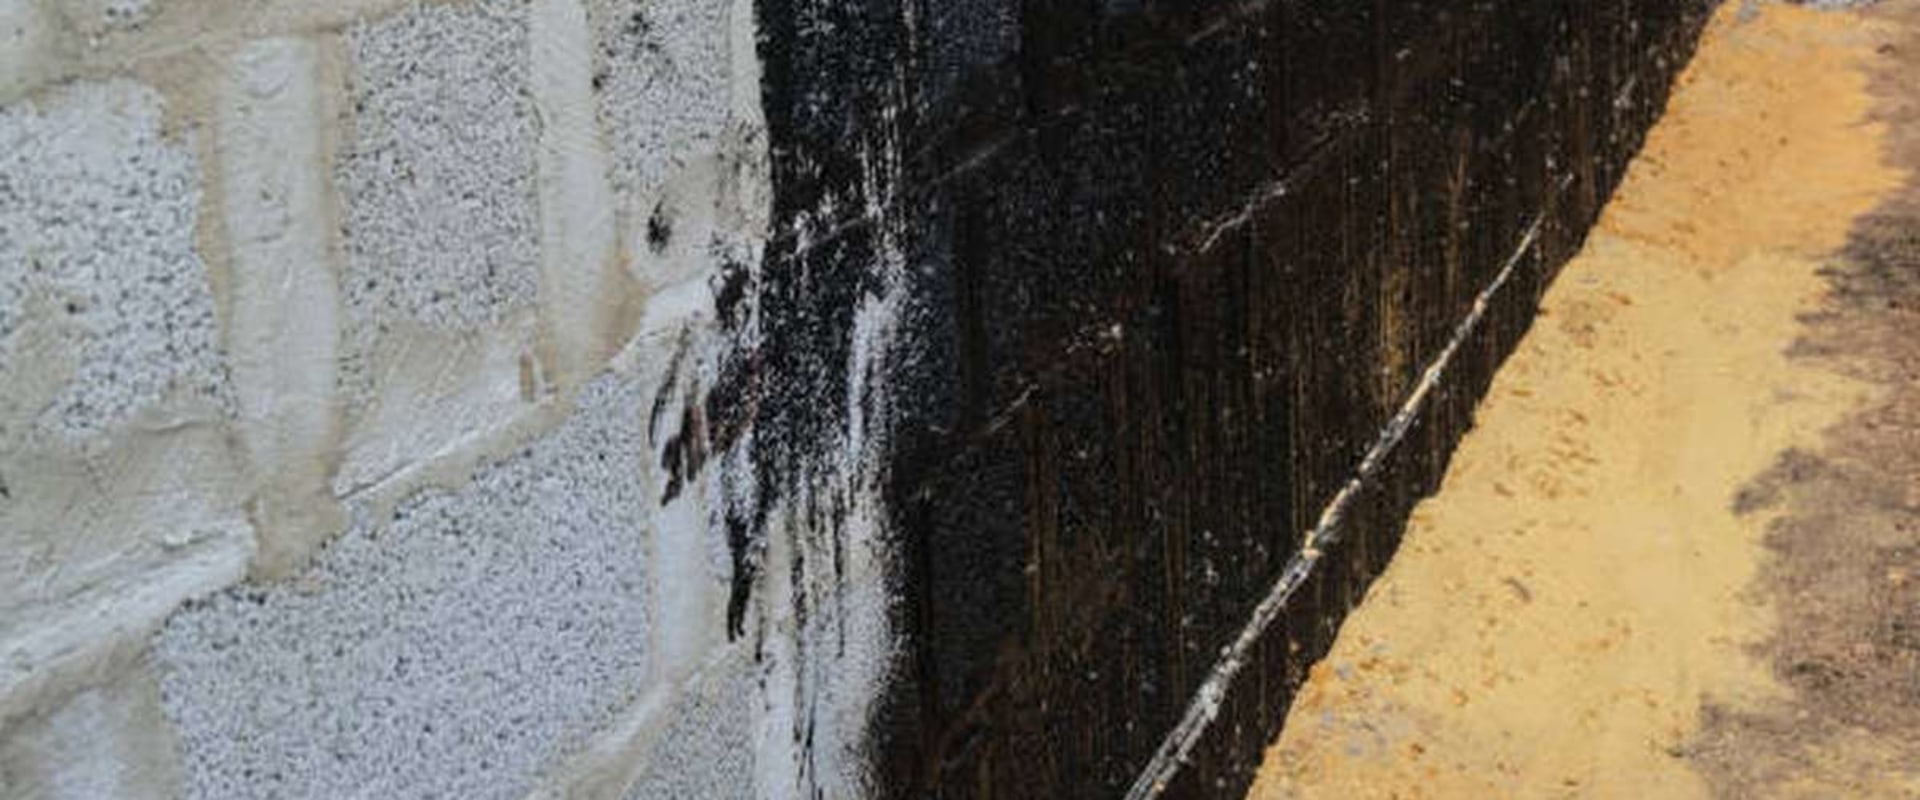 Waterproof Coatings for Brick and Concrete Surfaces: Protecting Your Home from Water Damage